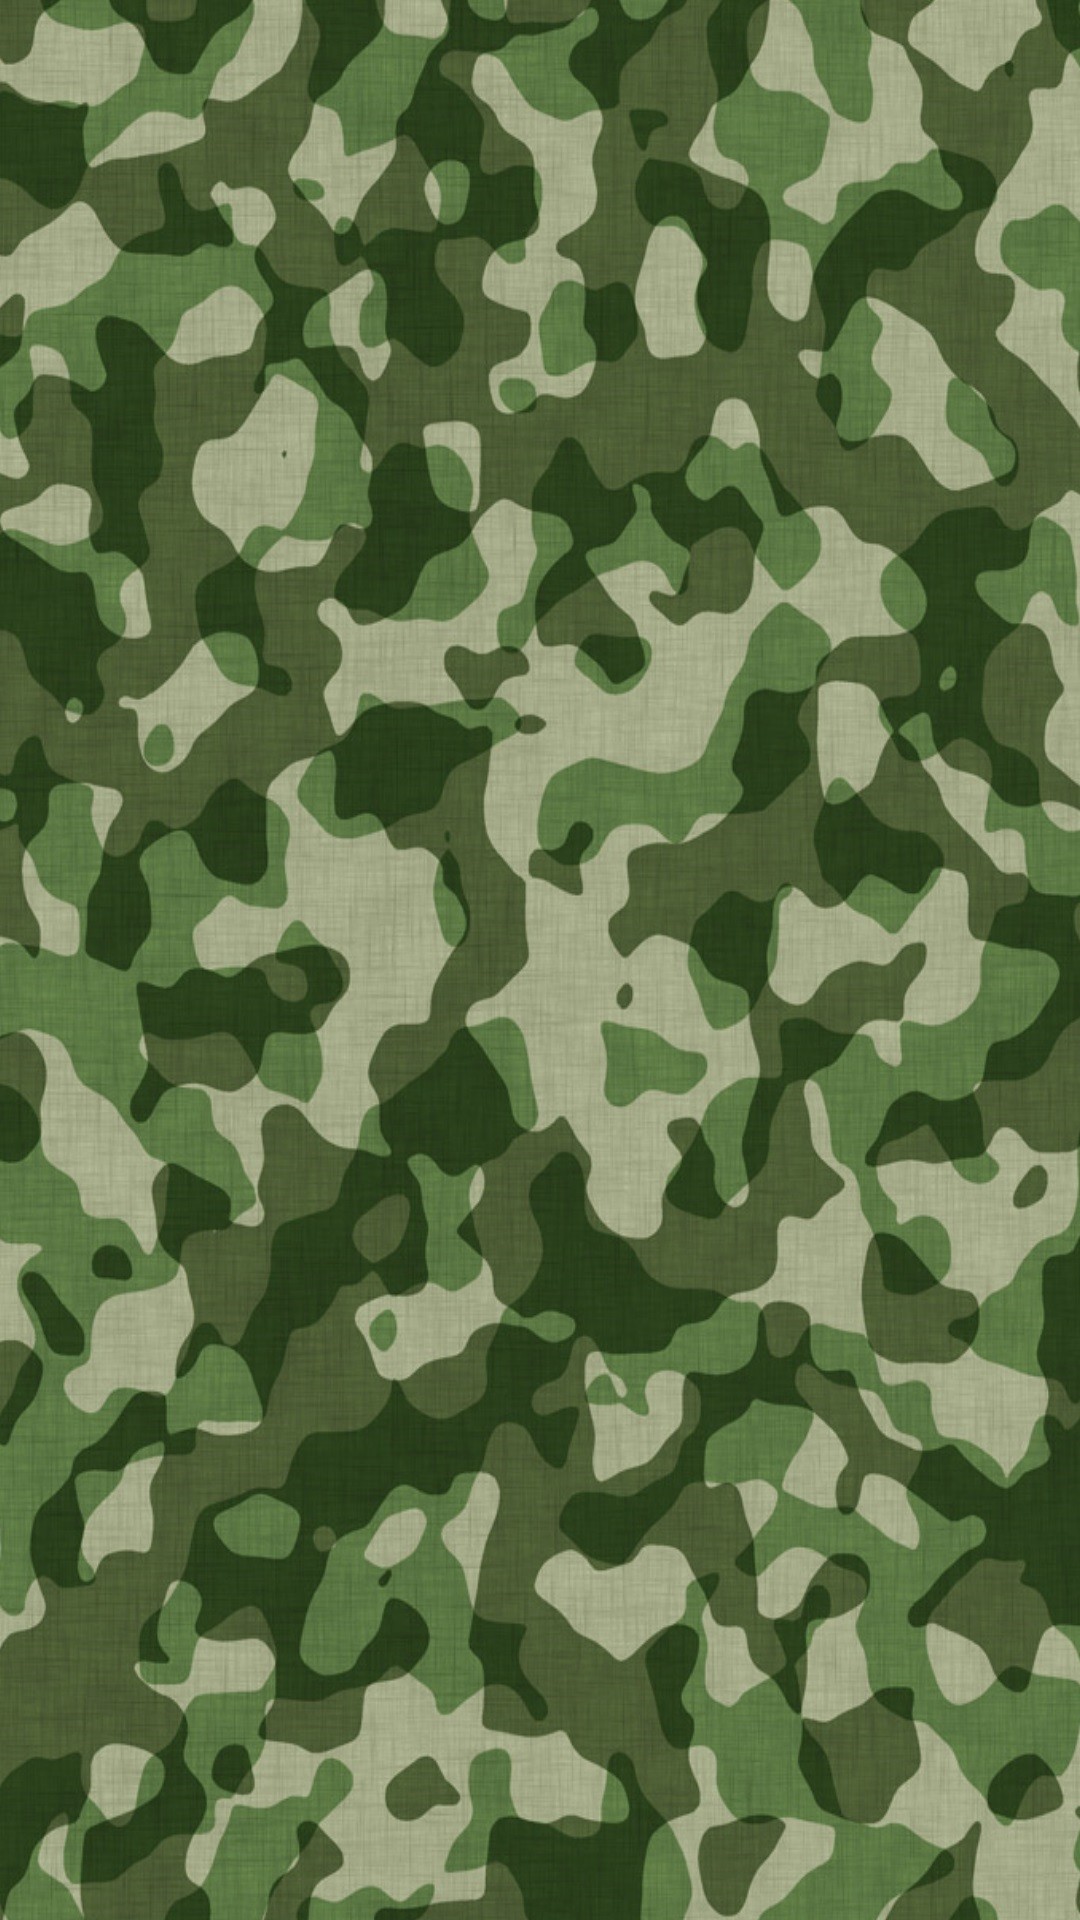 camouflage wallpaper,military camouflage,green,pattern,camouflage,clothing